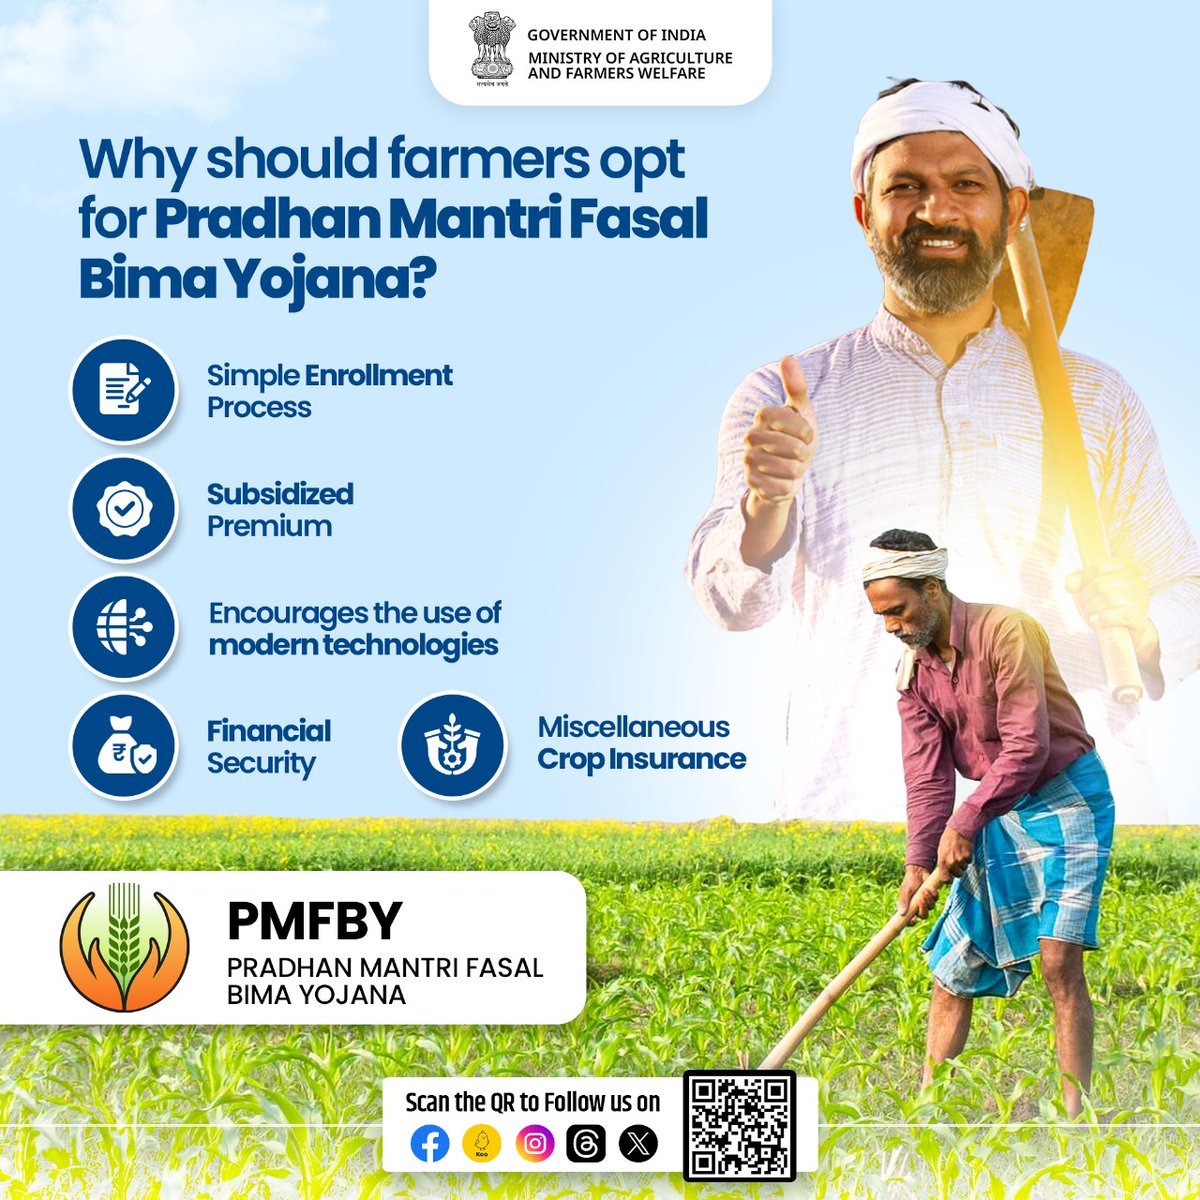 Pradhan Mantri Fasal Bima Yojana provides affordable crop insurance to farmers. All farmers may opt for the scheme & avail the benefits. For more scheme-related information visit pmfby.gov.in #agrigoi #PMFBY #CropInsurance #PMFBY4Farmers #EmpoweringFarmers